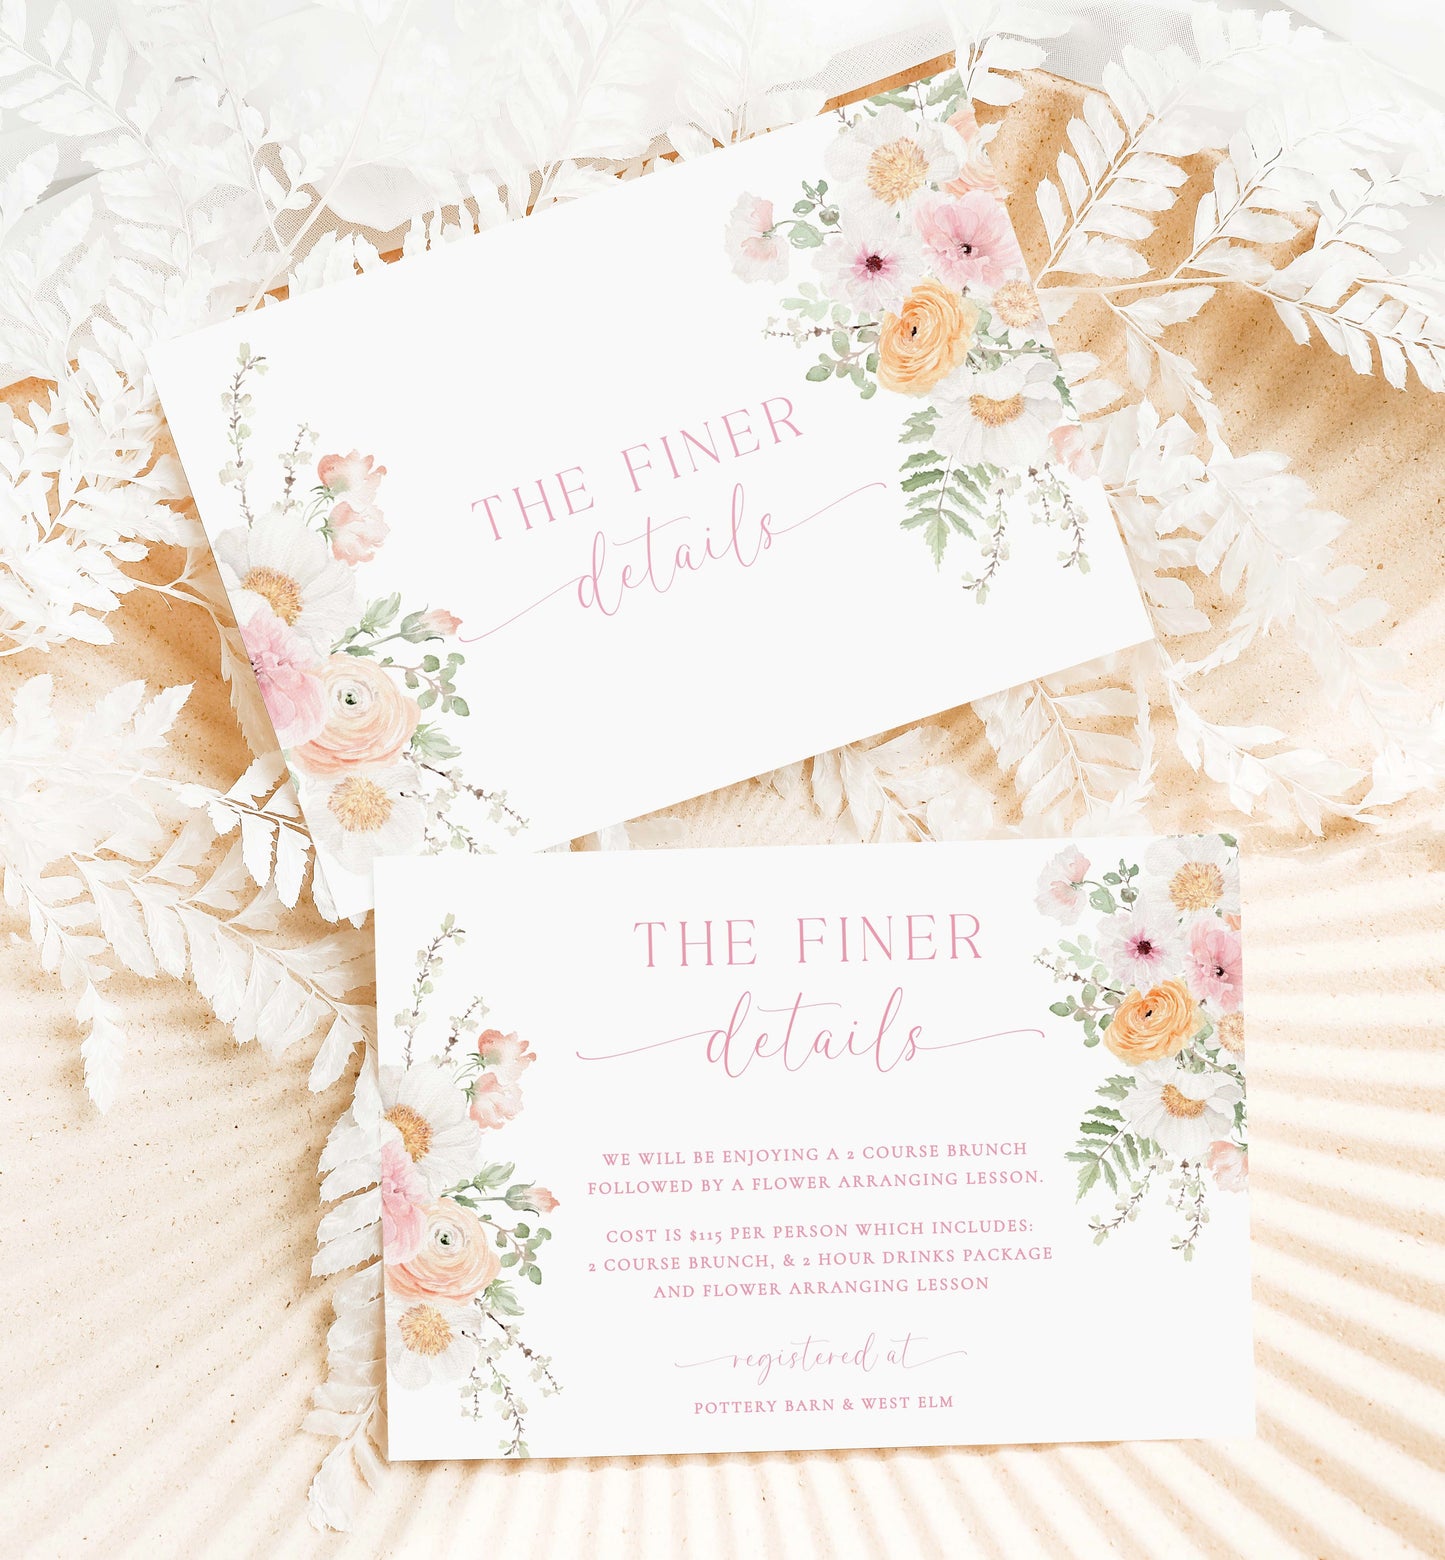 Love In Bloom Bridal Shower Invite, Thank You and Finer Details Card, Printable Spring Floral Bridal Shower Invite, Pink Wildflower, Millie